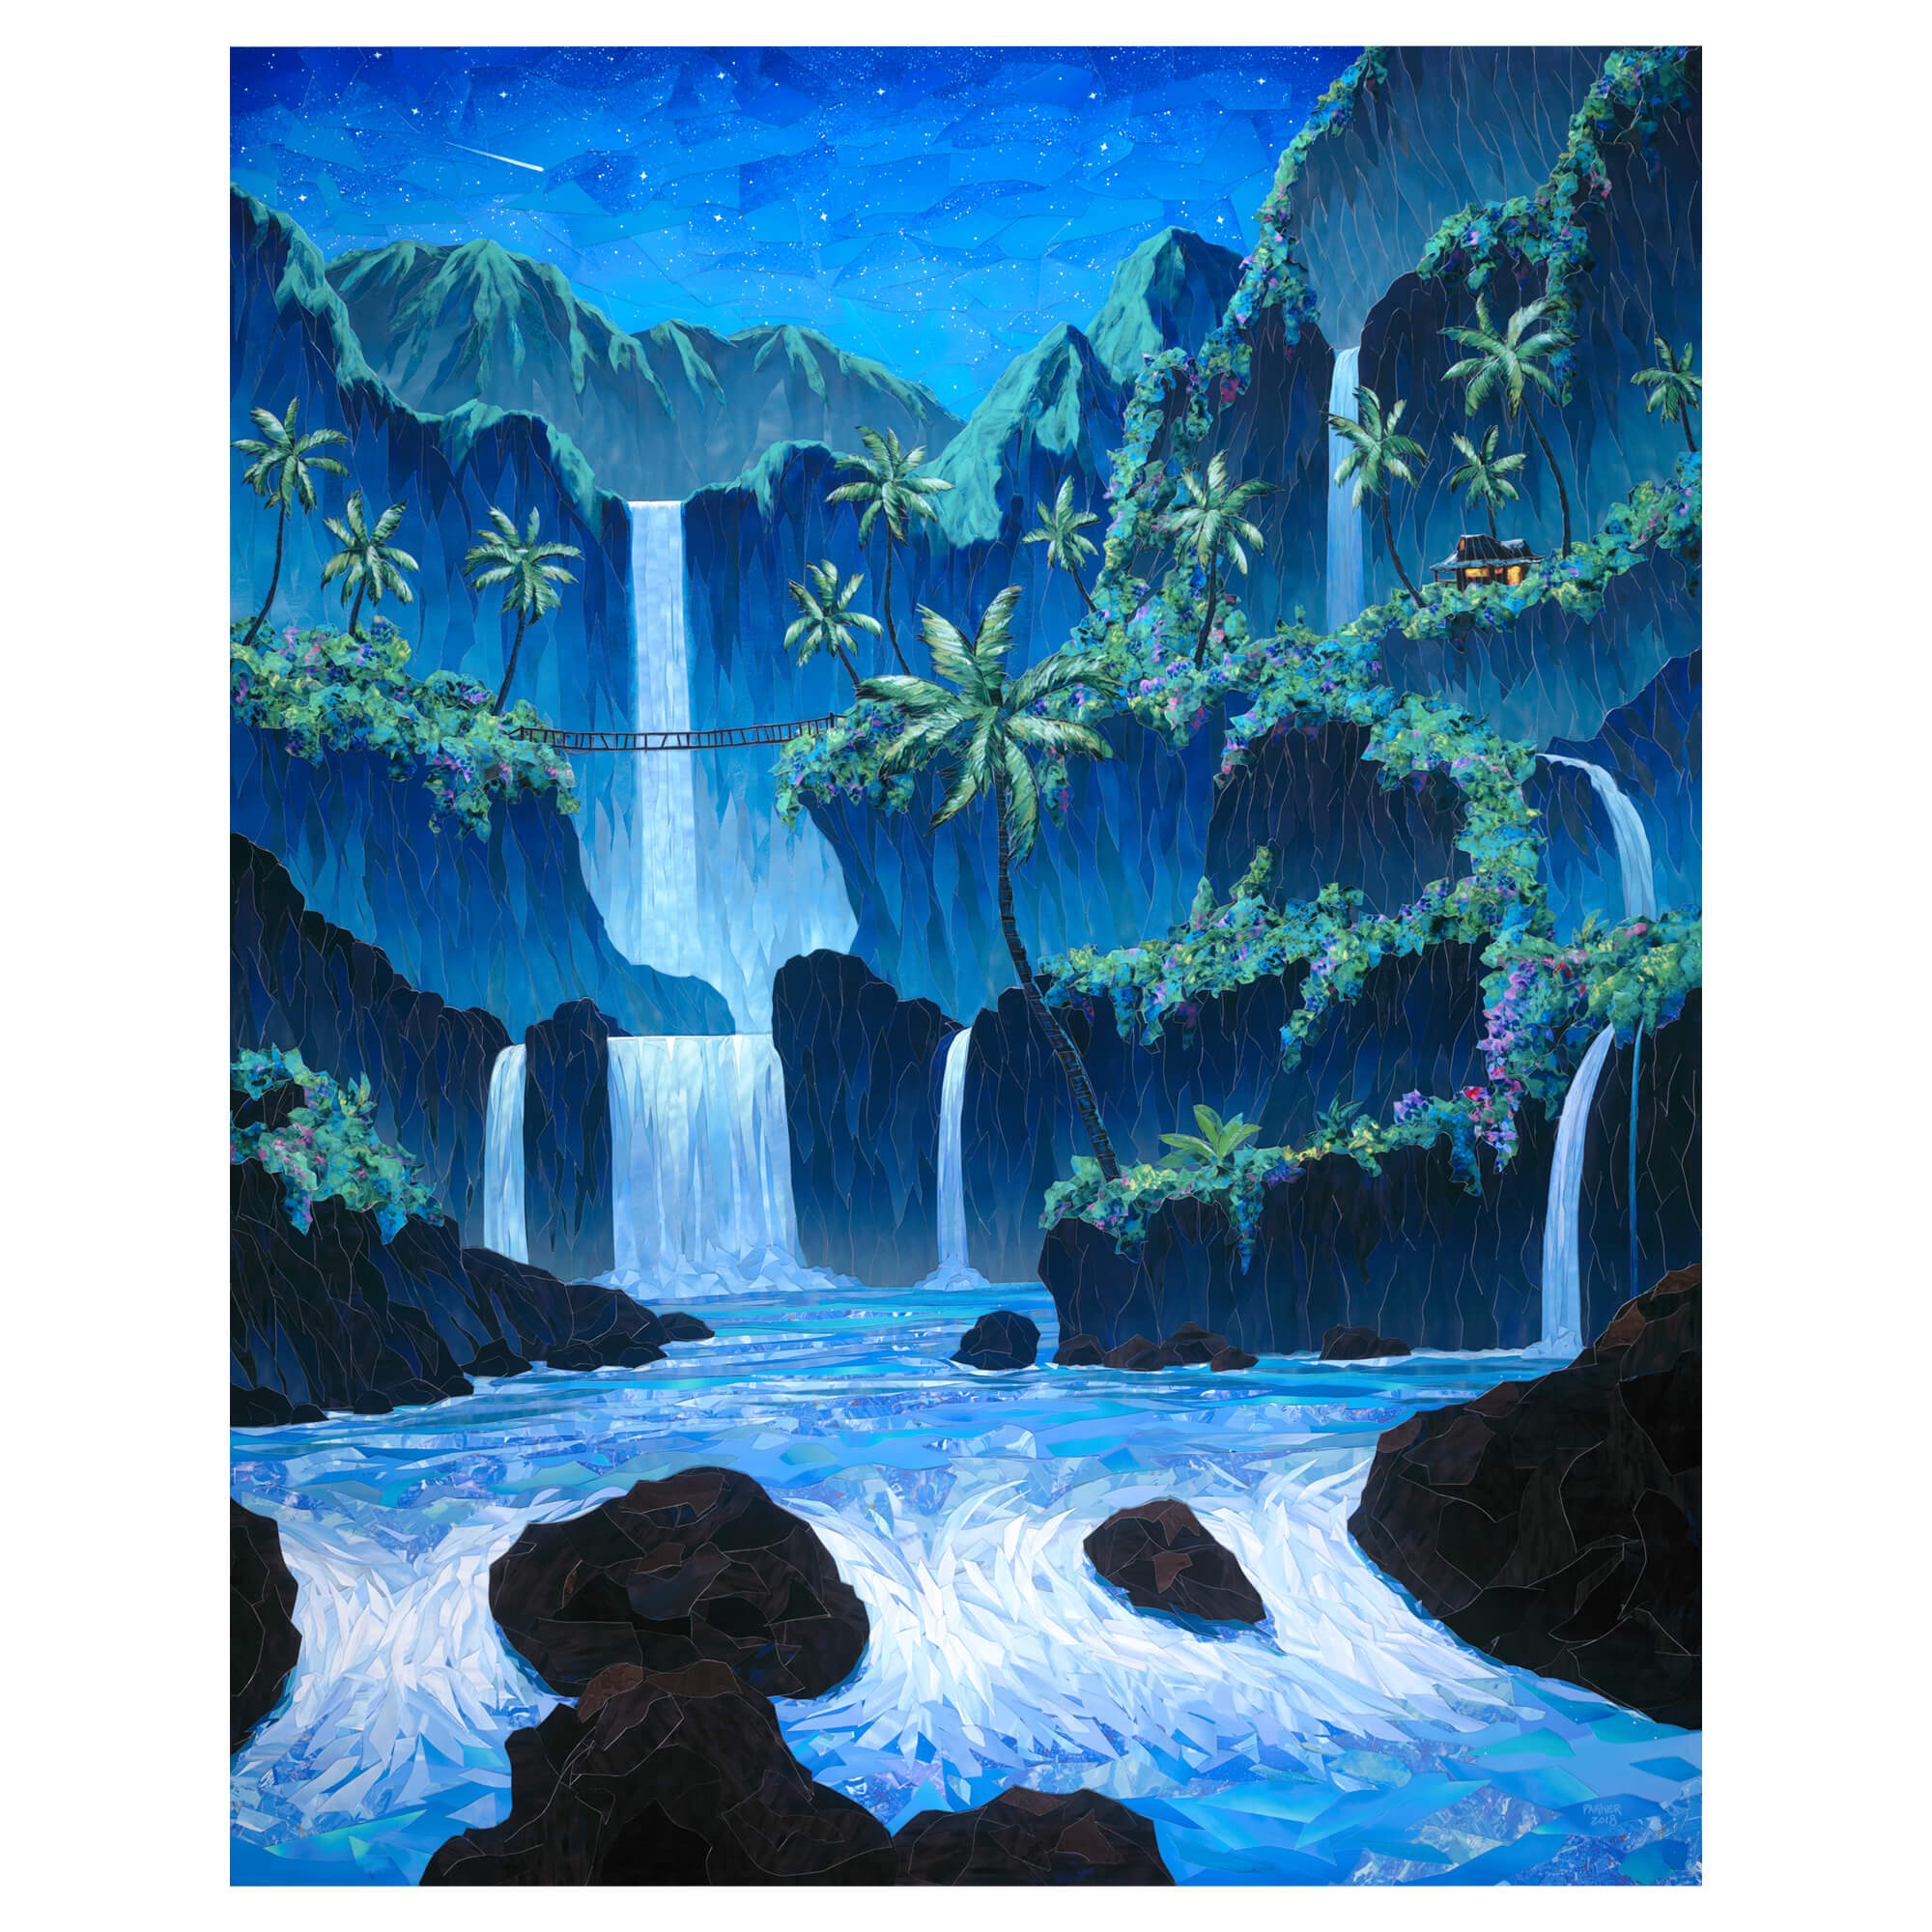 A canvas giclée art print featuring a collage of a dreamy tropical paradise with several waterfalls, surrounded by Mountains and colorful tropical flowers by Hawaii artist Patrick Parker